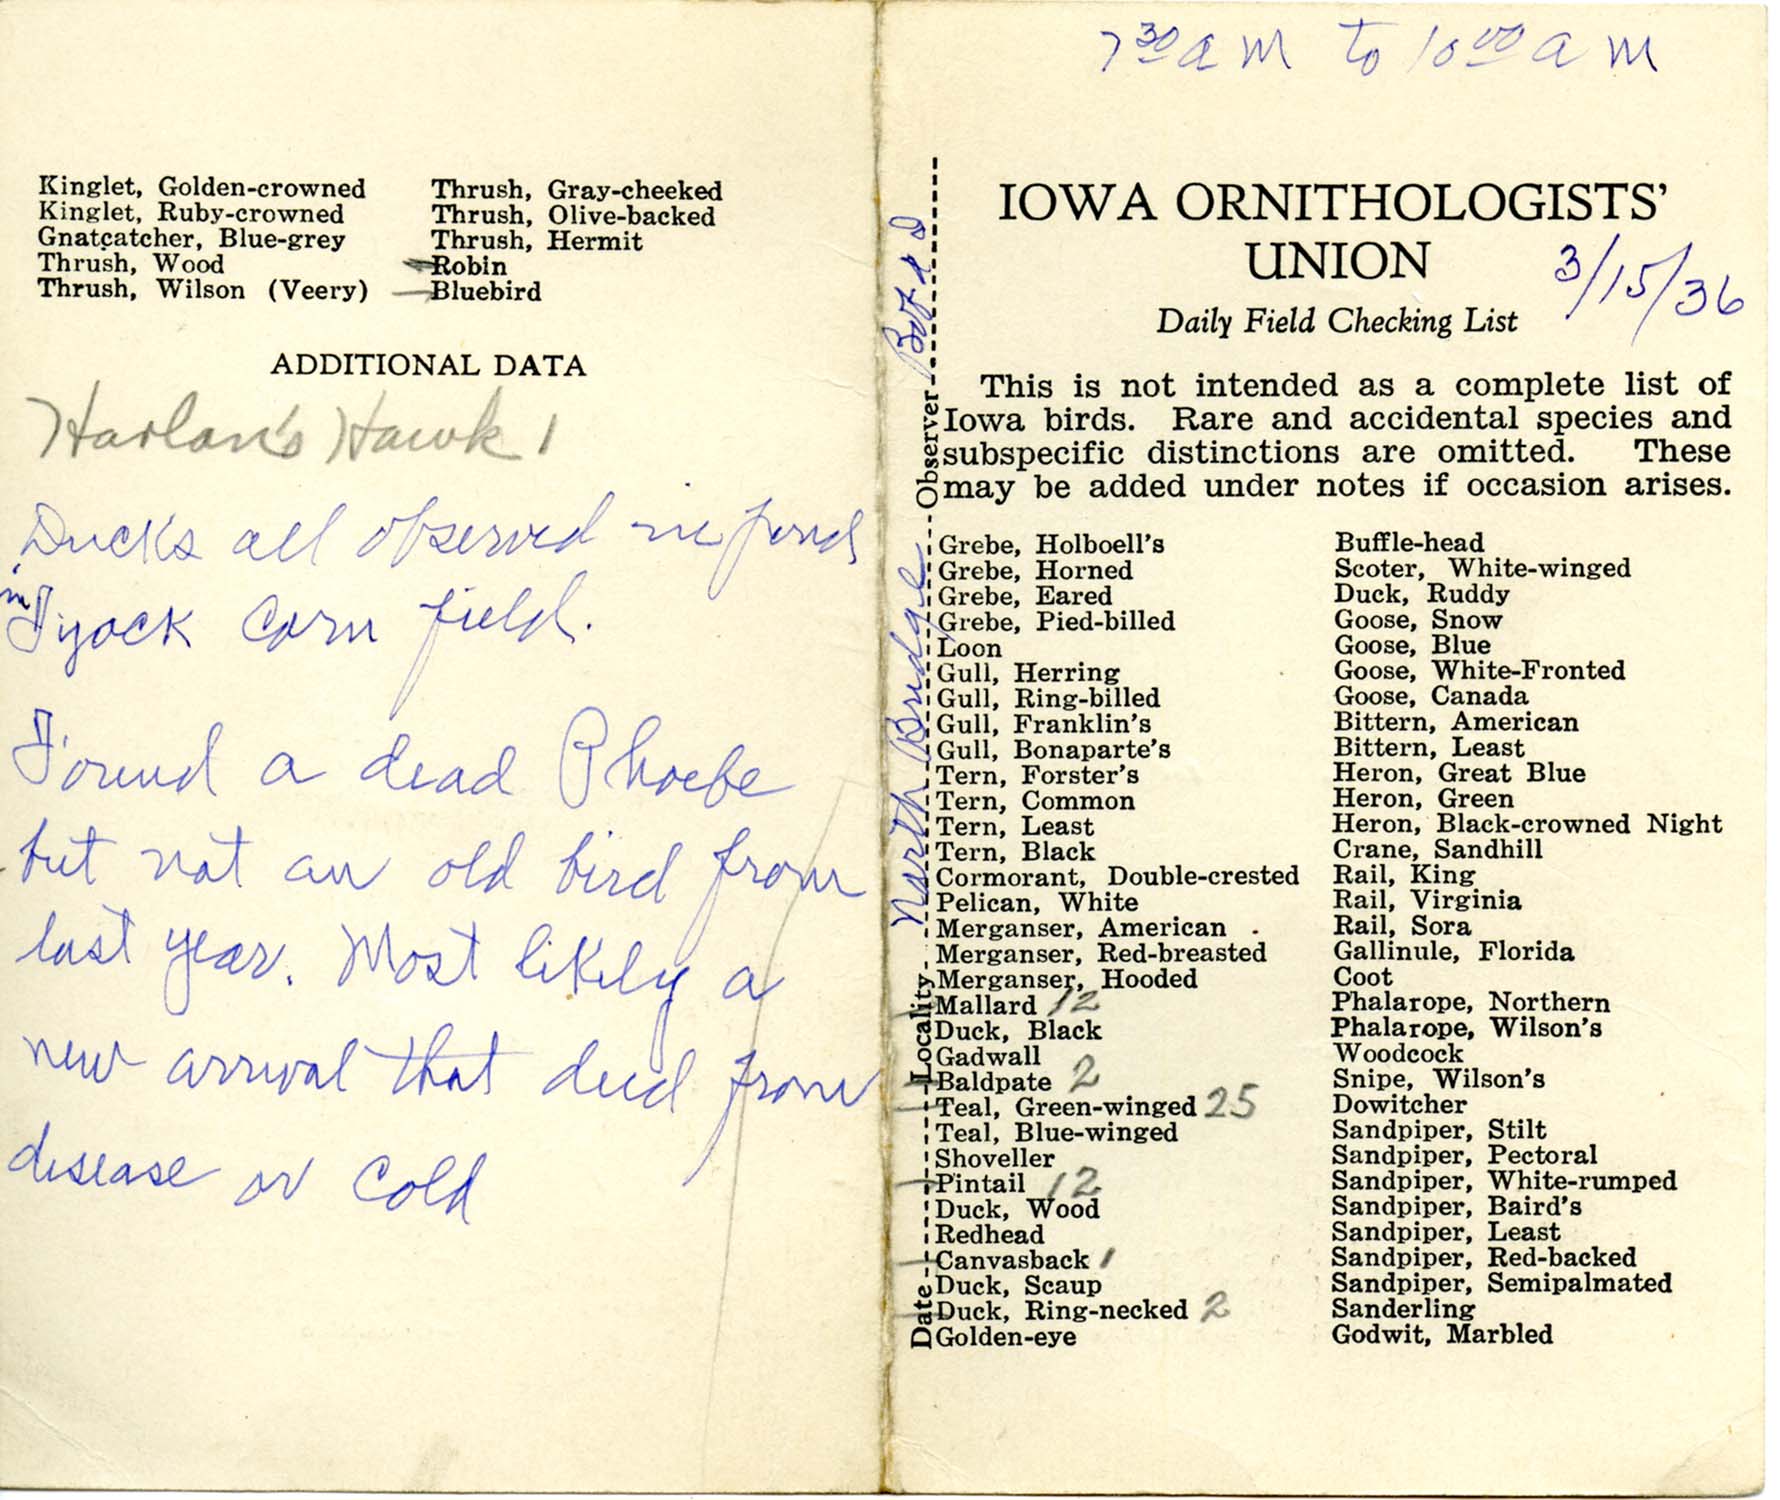 Daily field checking list by Walter Rosene, March 15, 1936